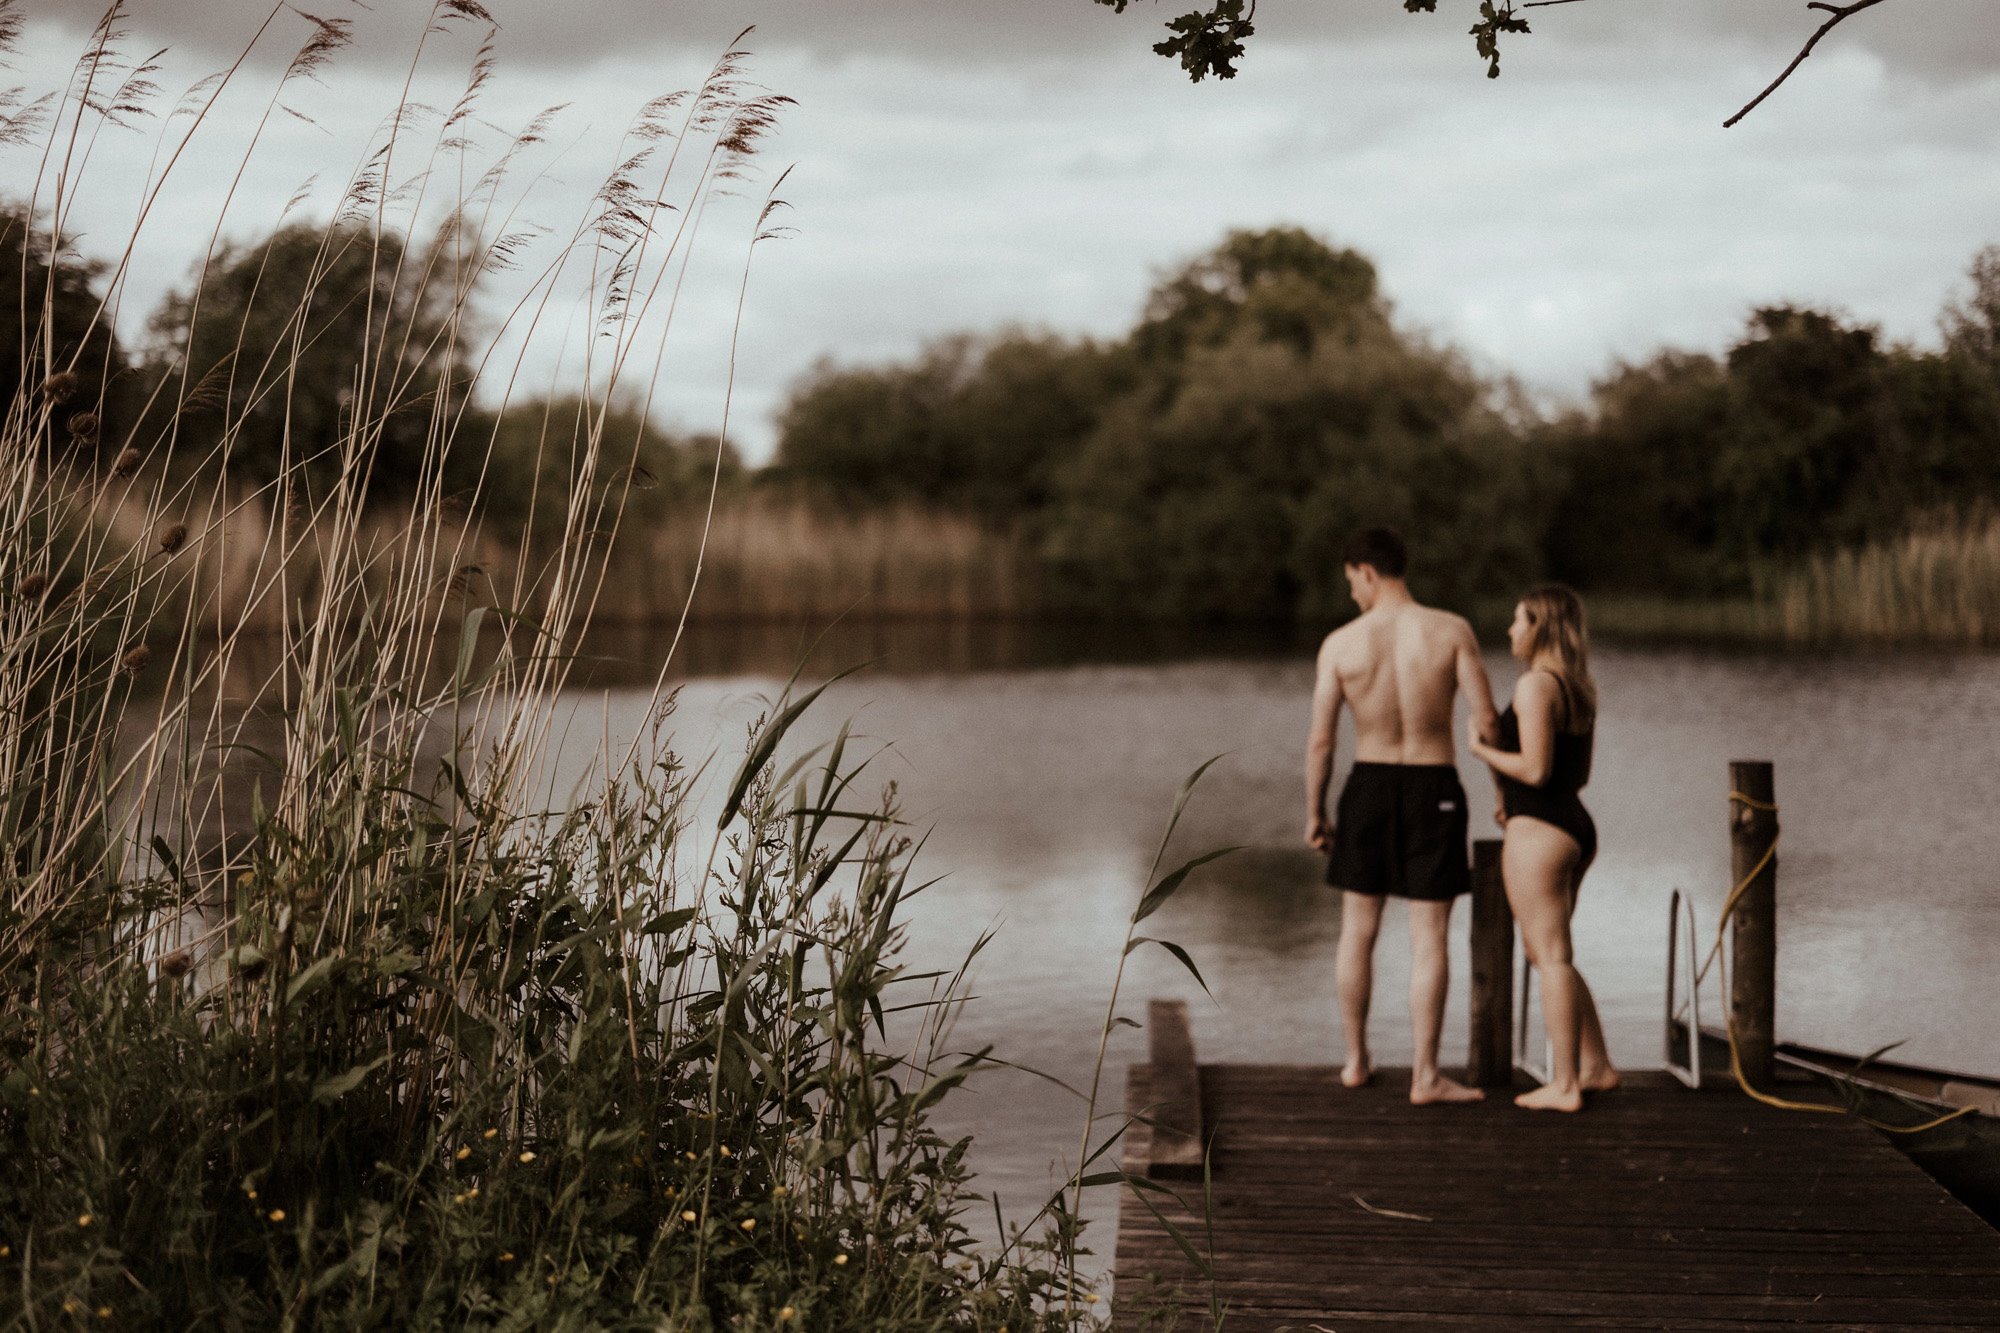 Wild swimming weddings at the spring fed lake at UK wedding venue elmore court which is rewilding part of the estate